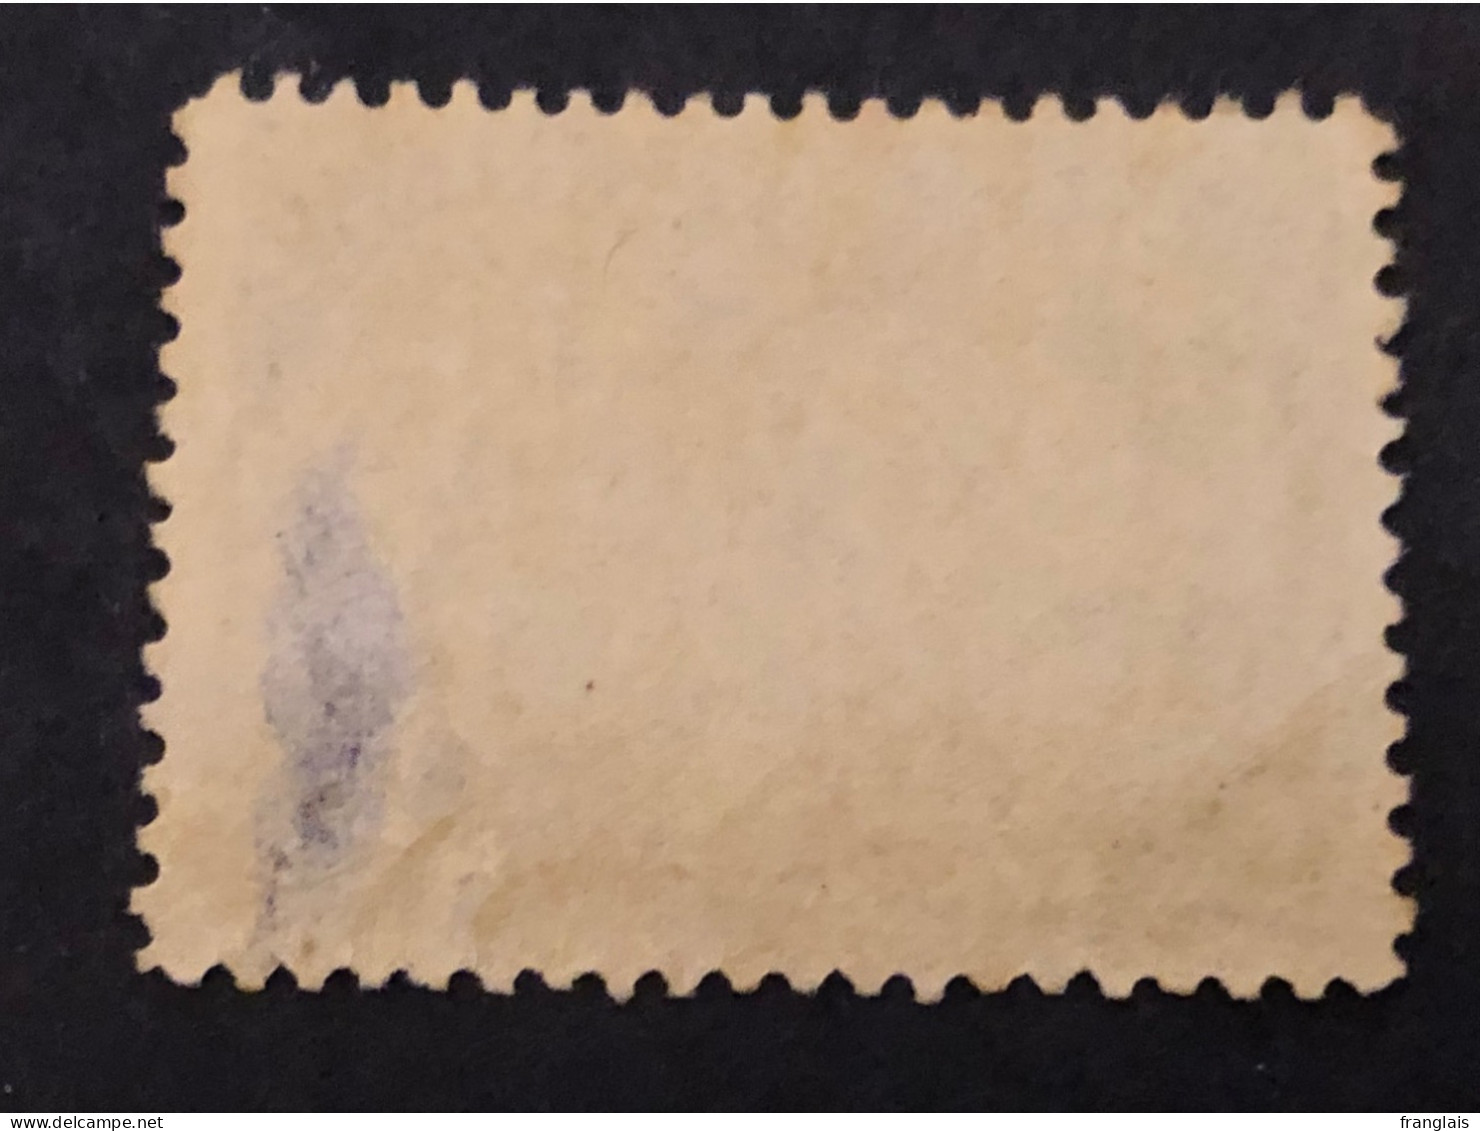 Sc 57 SG 131 Jubilee Issue Of 1897 10 Cent Violet MNH** But With A Thin / Aminci CV £90 - Nuevos